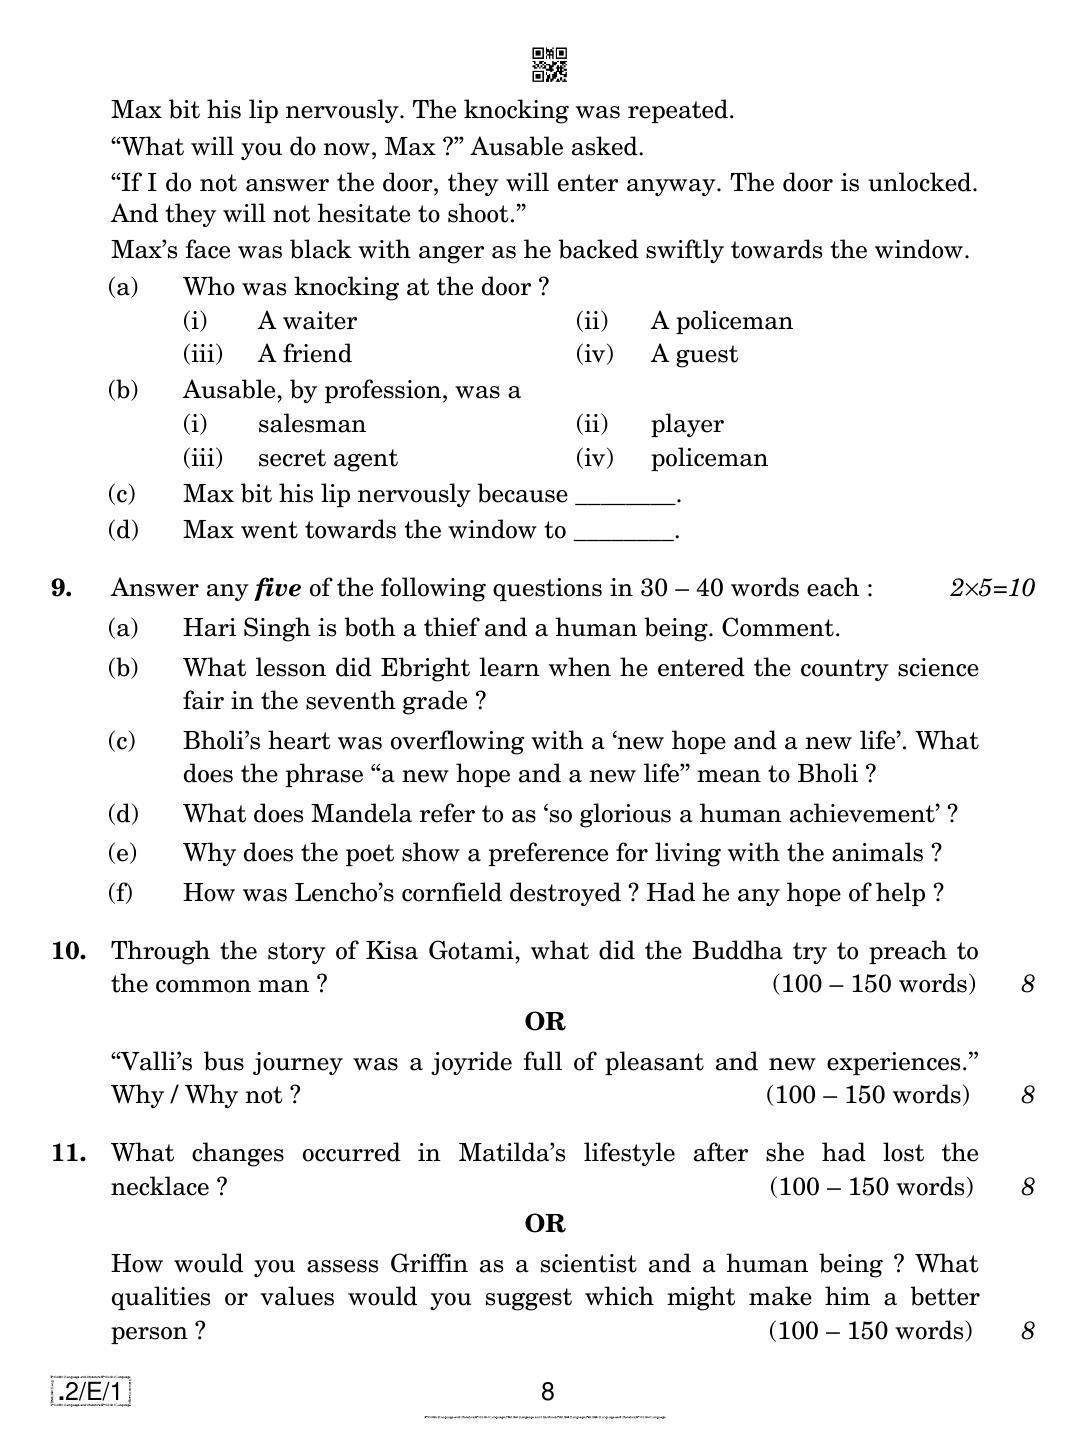 CBSE Class 10 2-C-1 Eng Lang. And Literature 2020 Compartment Question Paper - Page 8